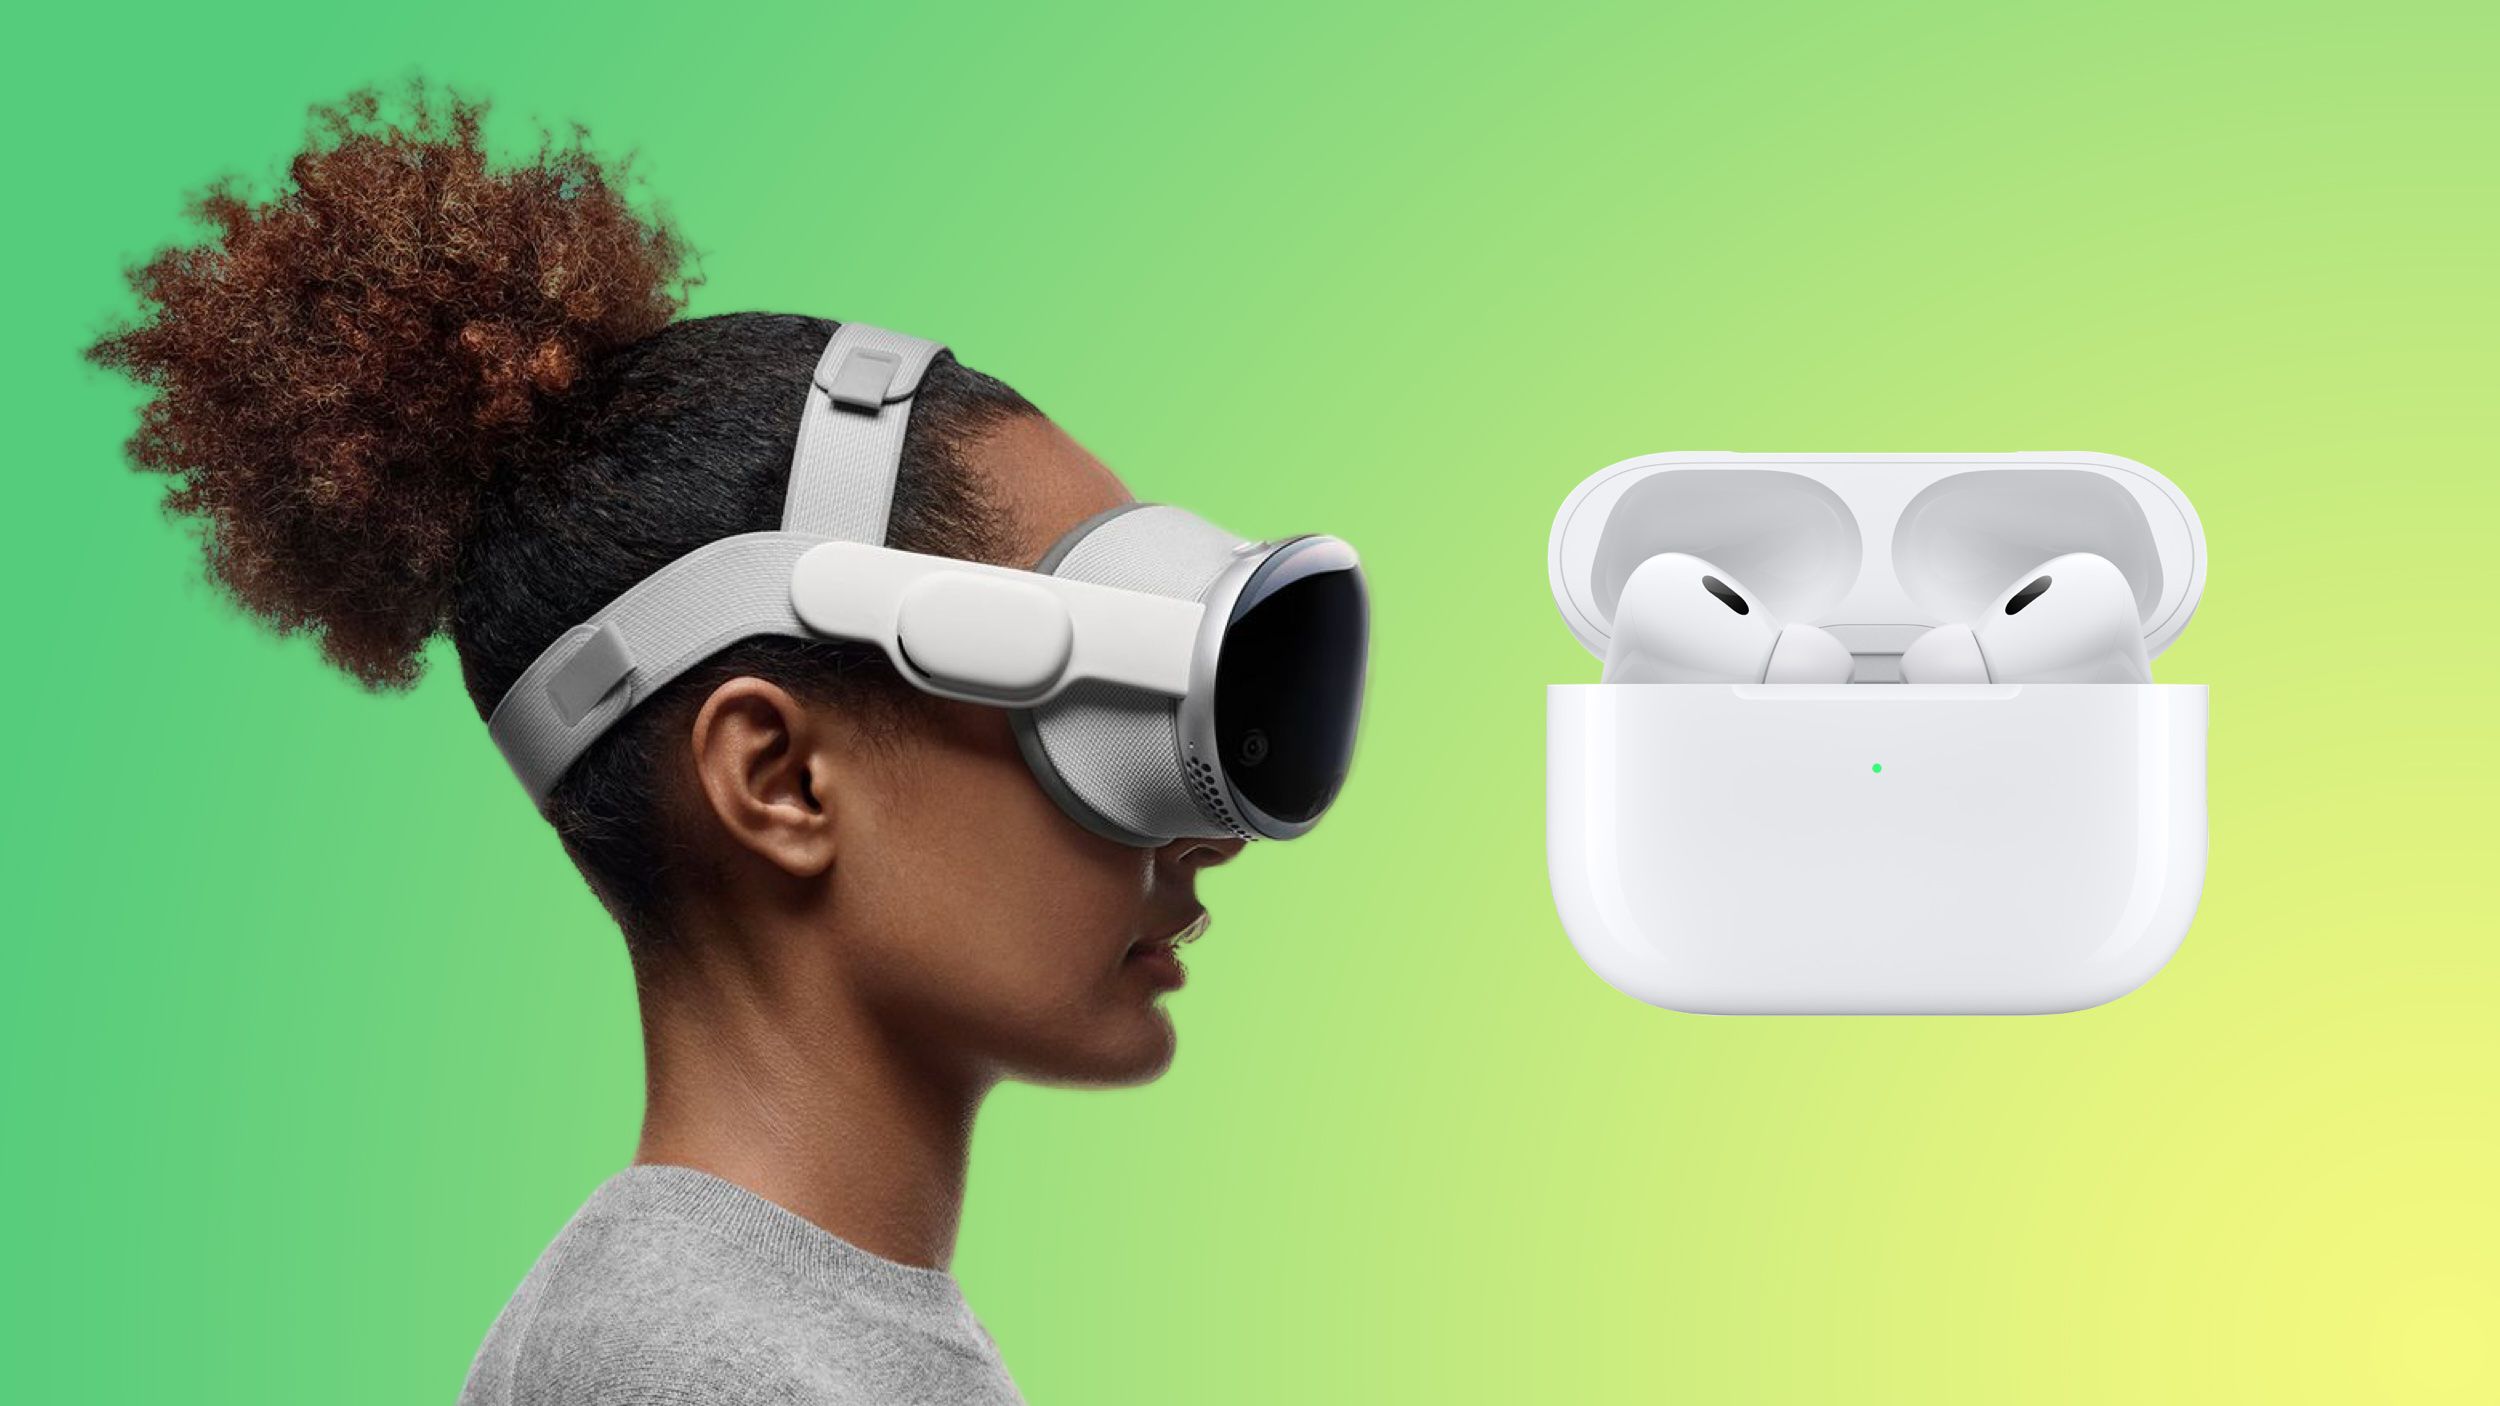 Upgrade Your Sound Experience: Pre-Order Apple Vision Pro and Receive AirPods Pro 2 with USB-C for 9